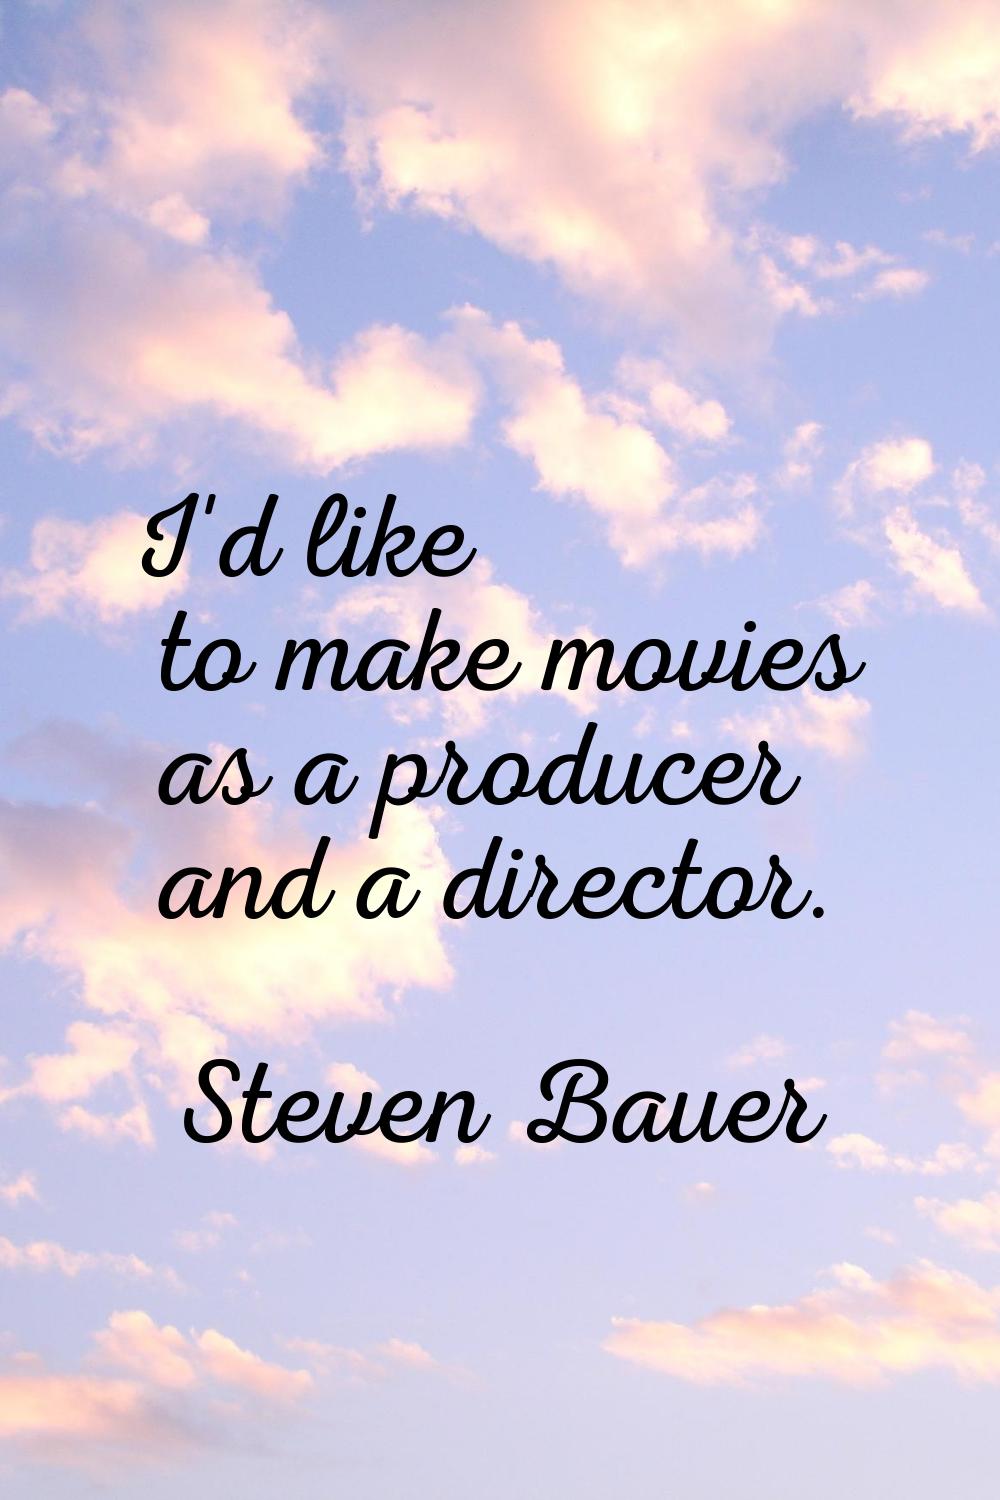 I'd like to make movies as a producer and a director.